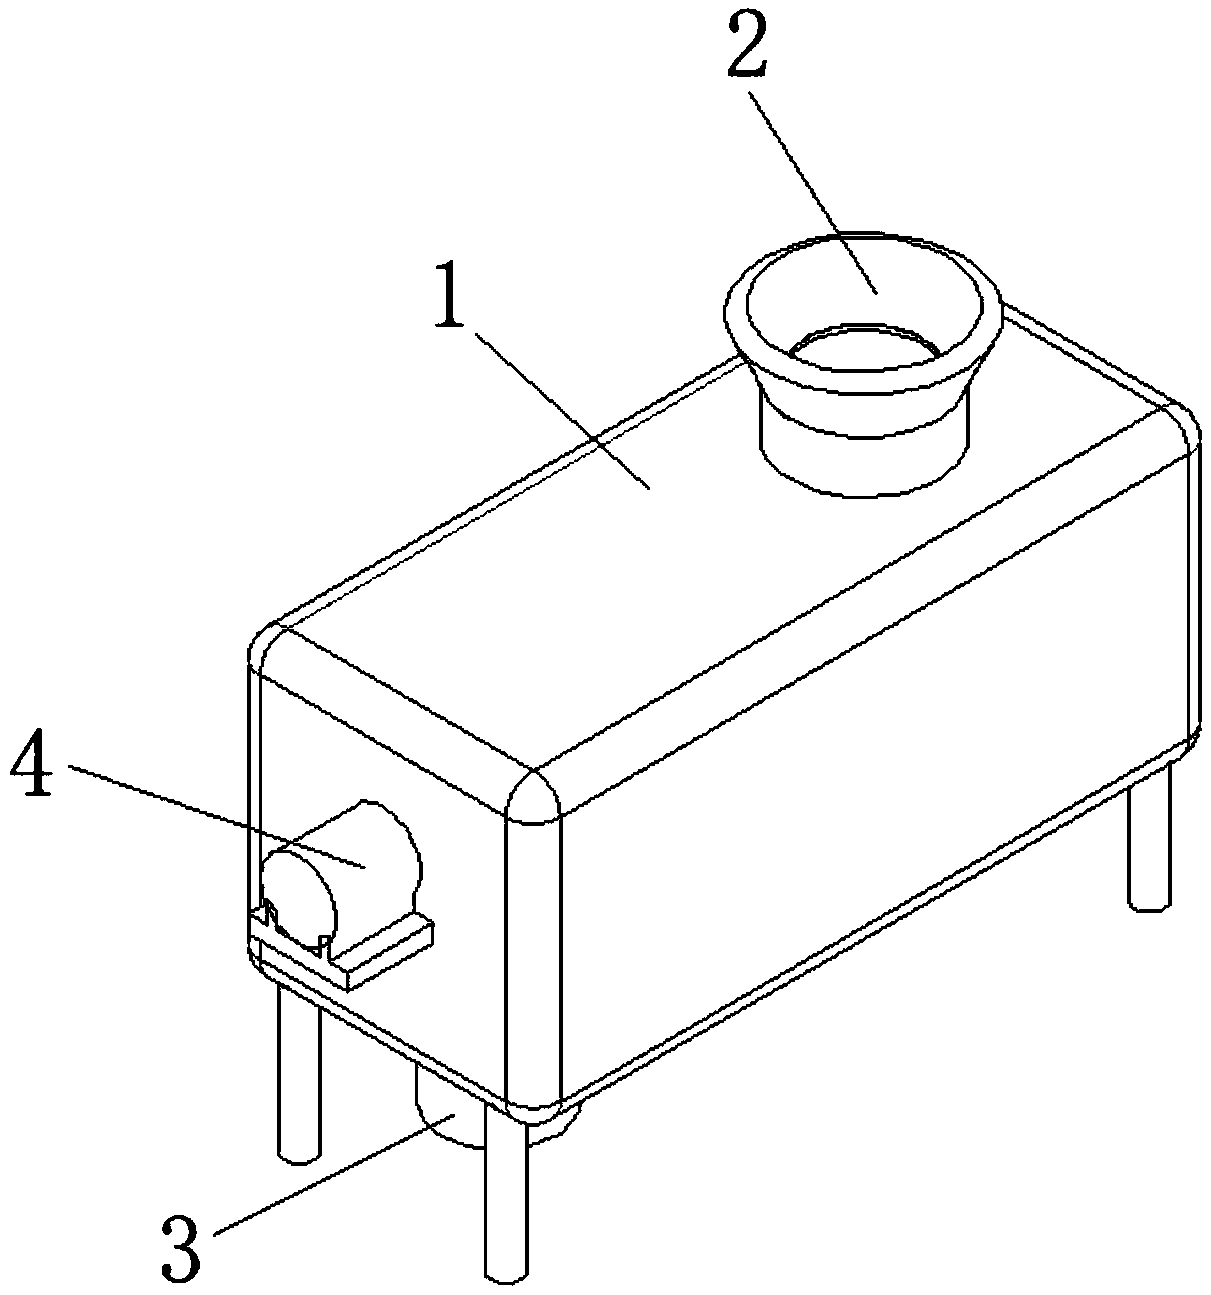 A spiral conveying peanut shell cracking equipment